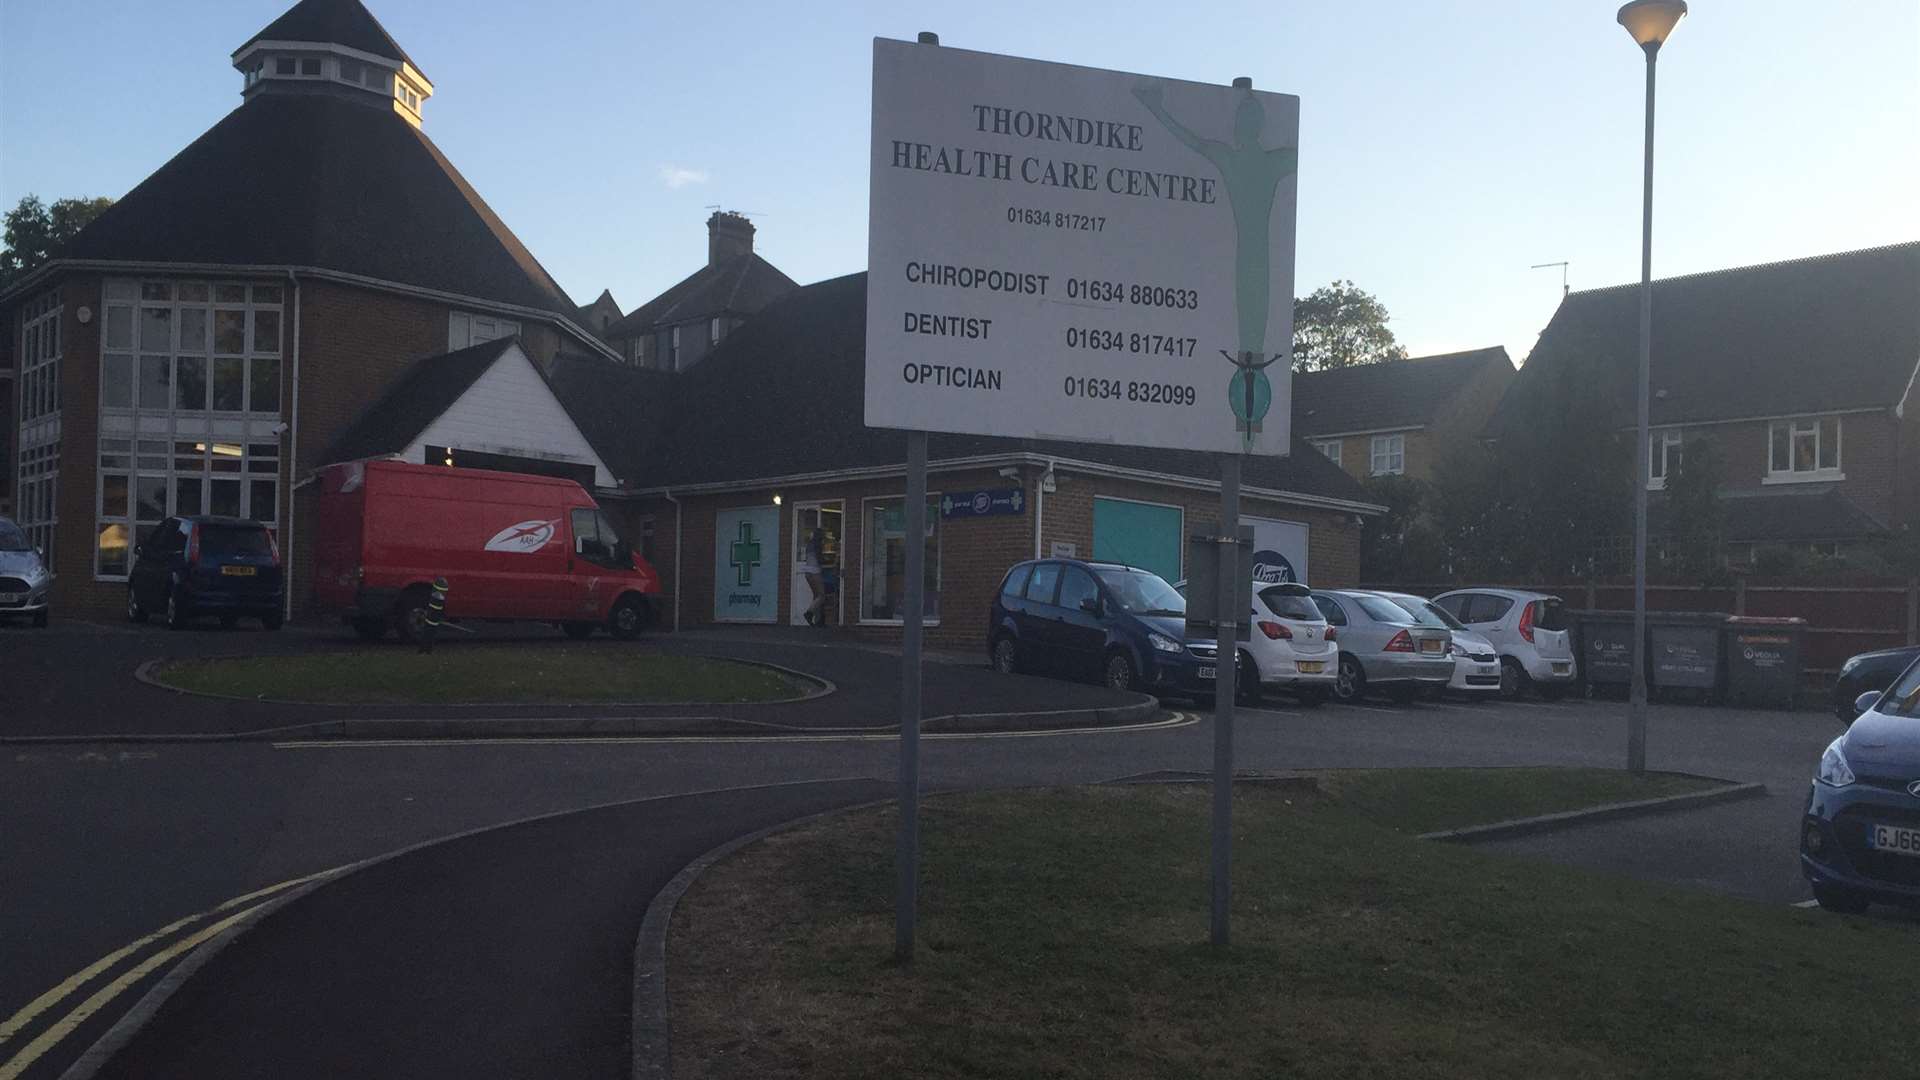 The Thorndike Medical Centre in Rochester